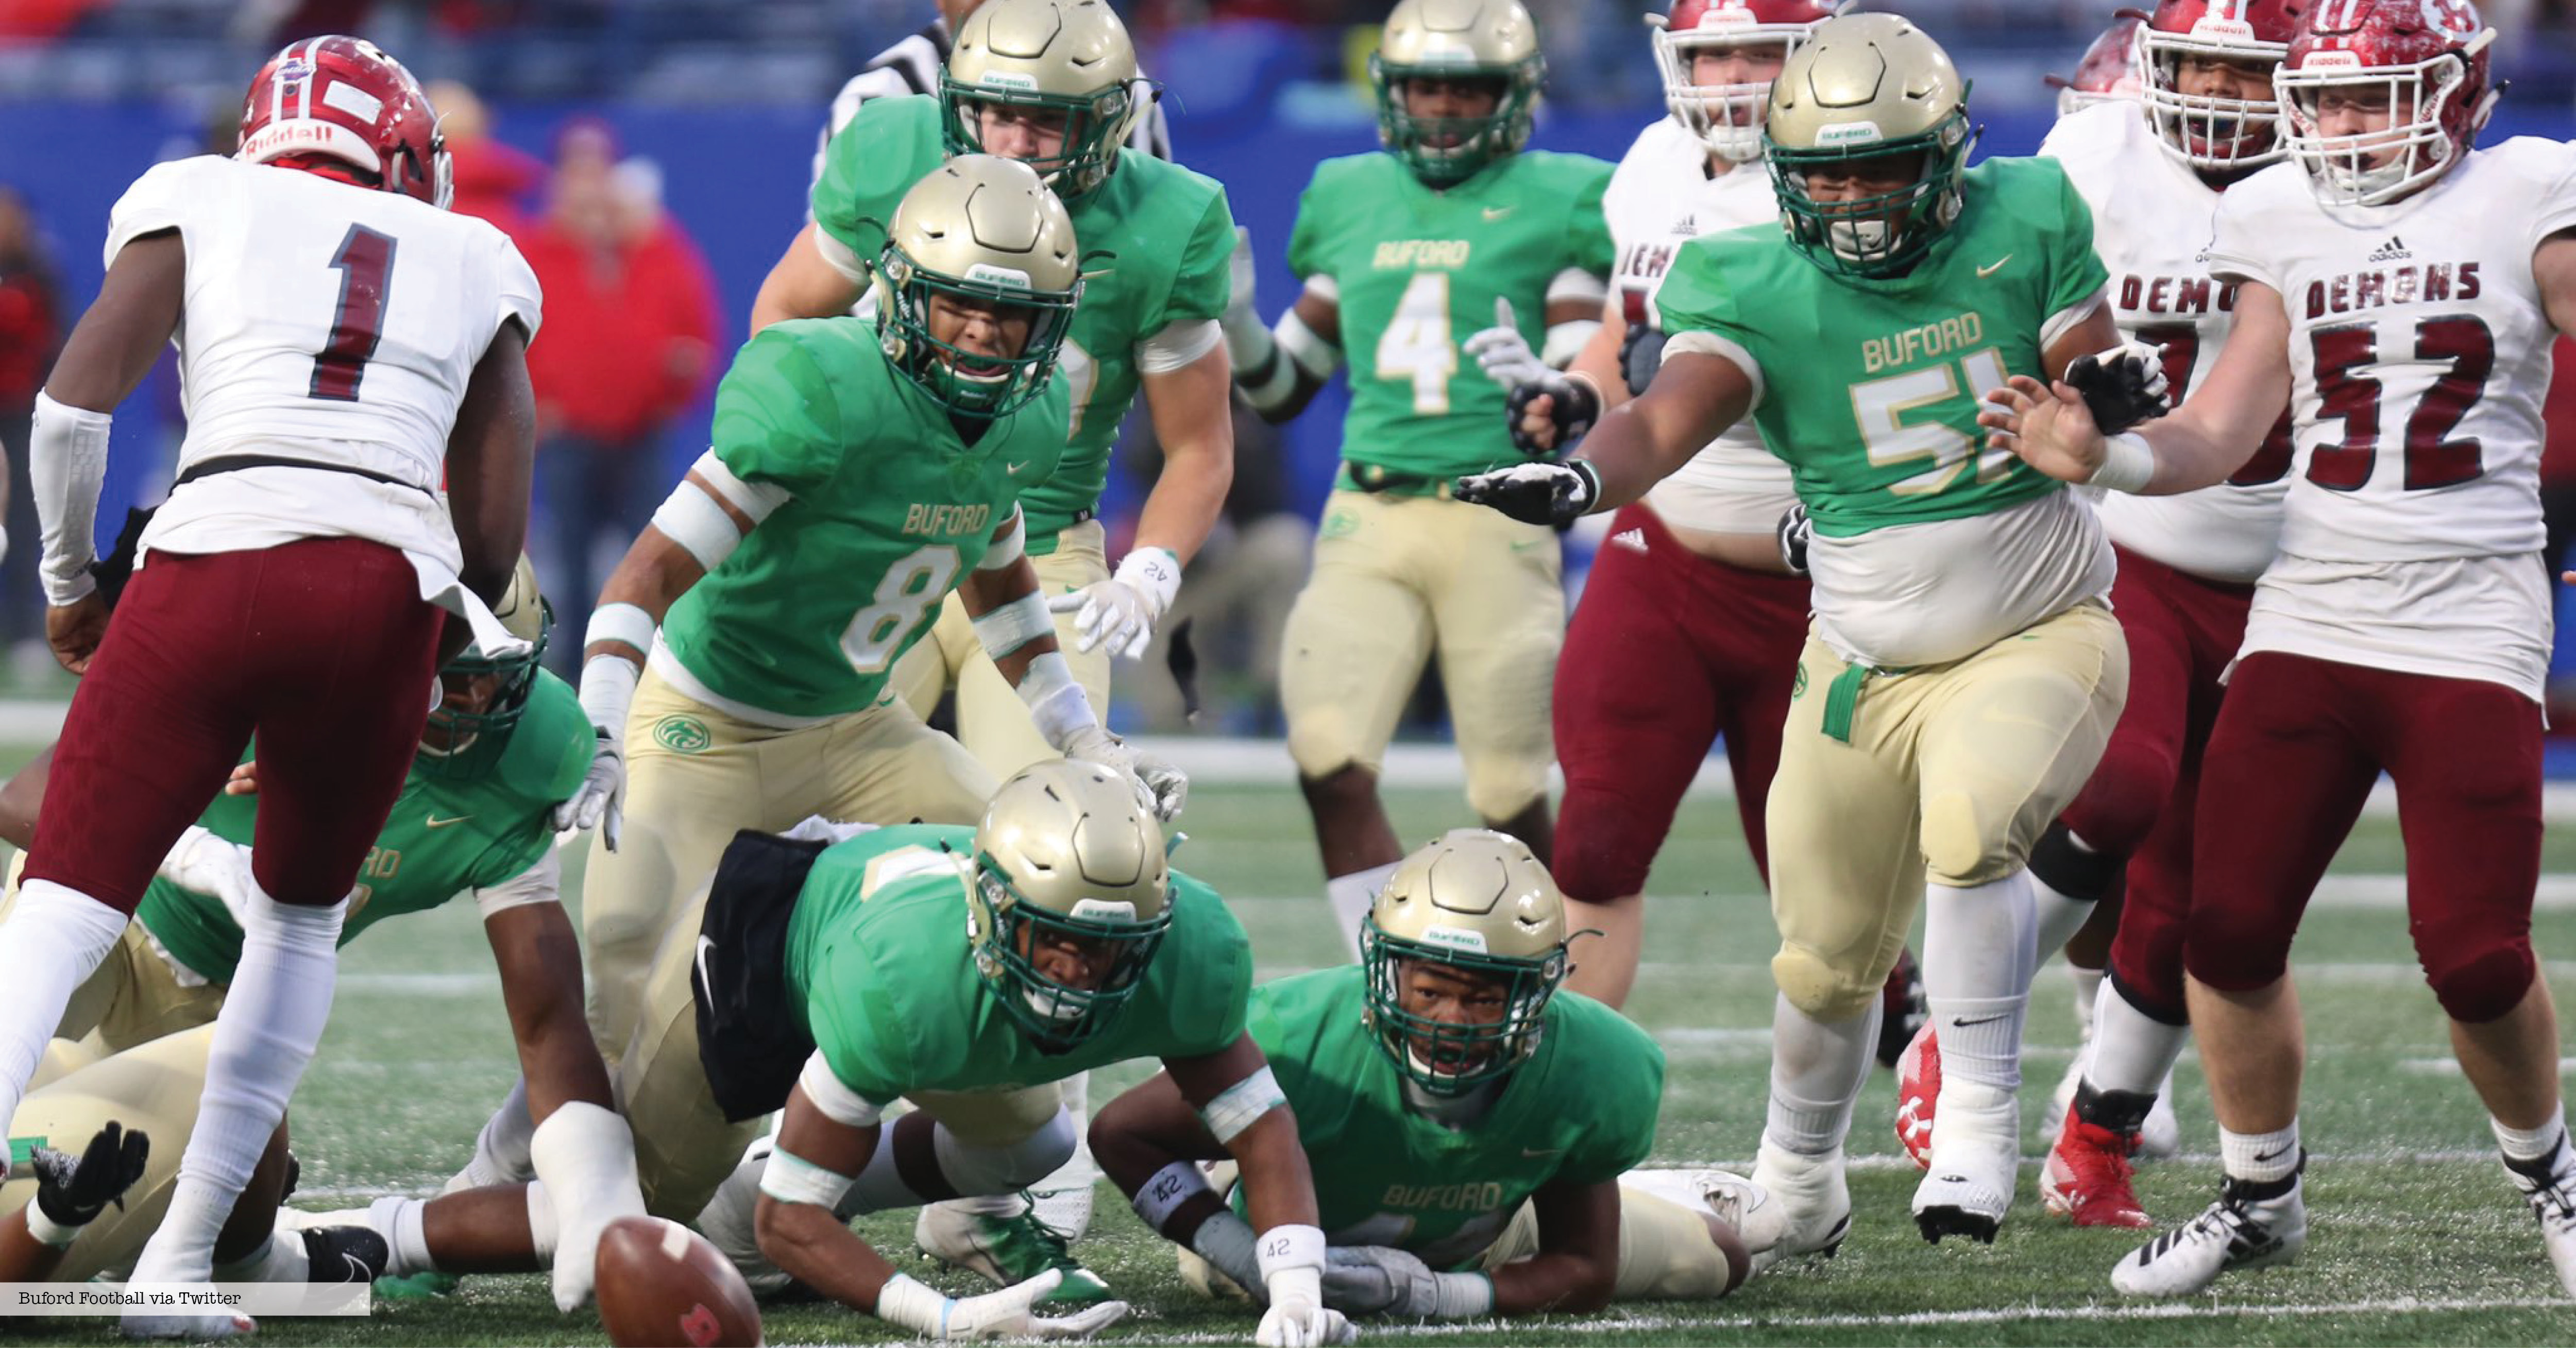 buford-football-2021-team-preview-itg-next